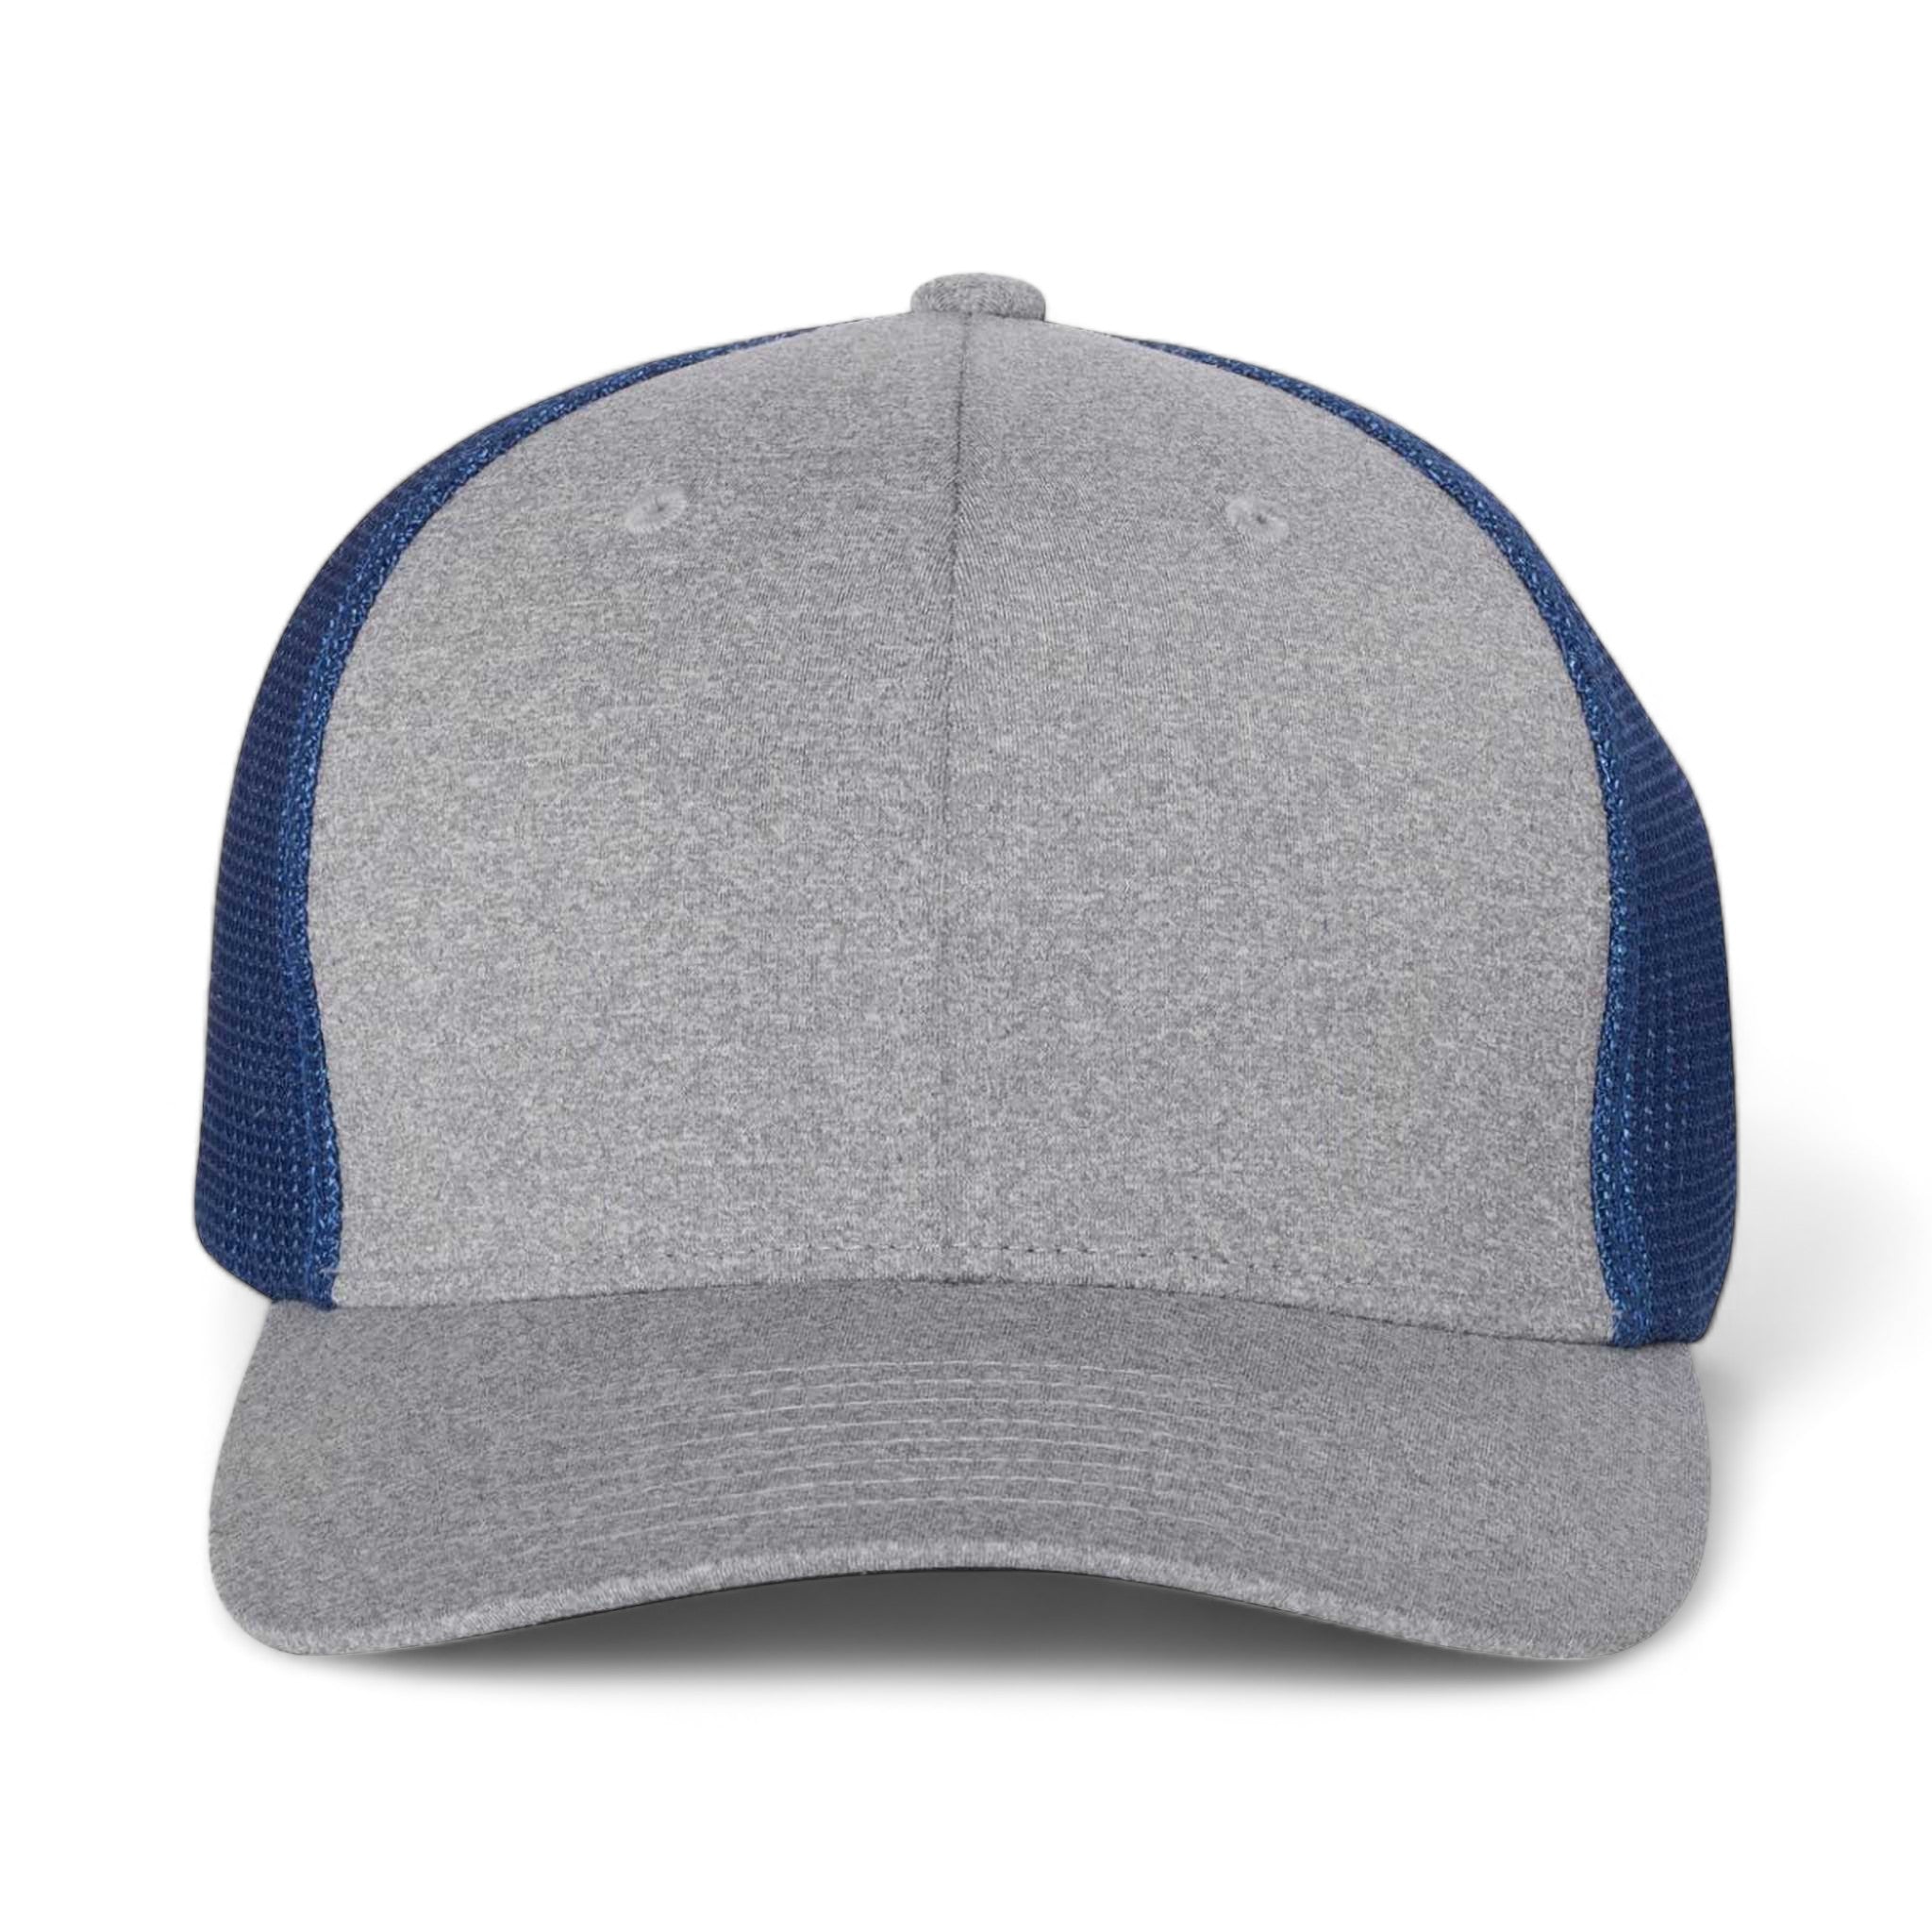 Front view of Flexfit 6311 custom hat in heather grey and royal